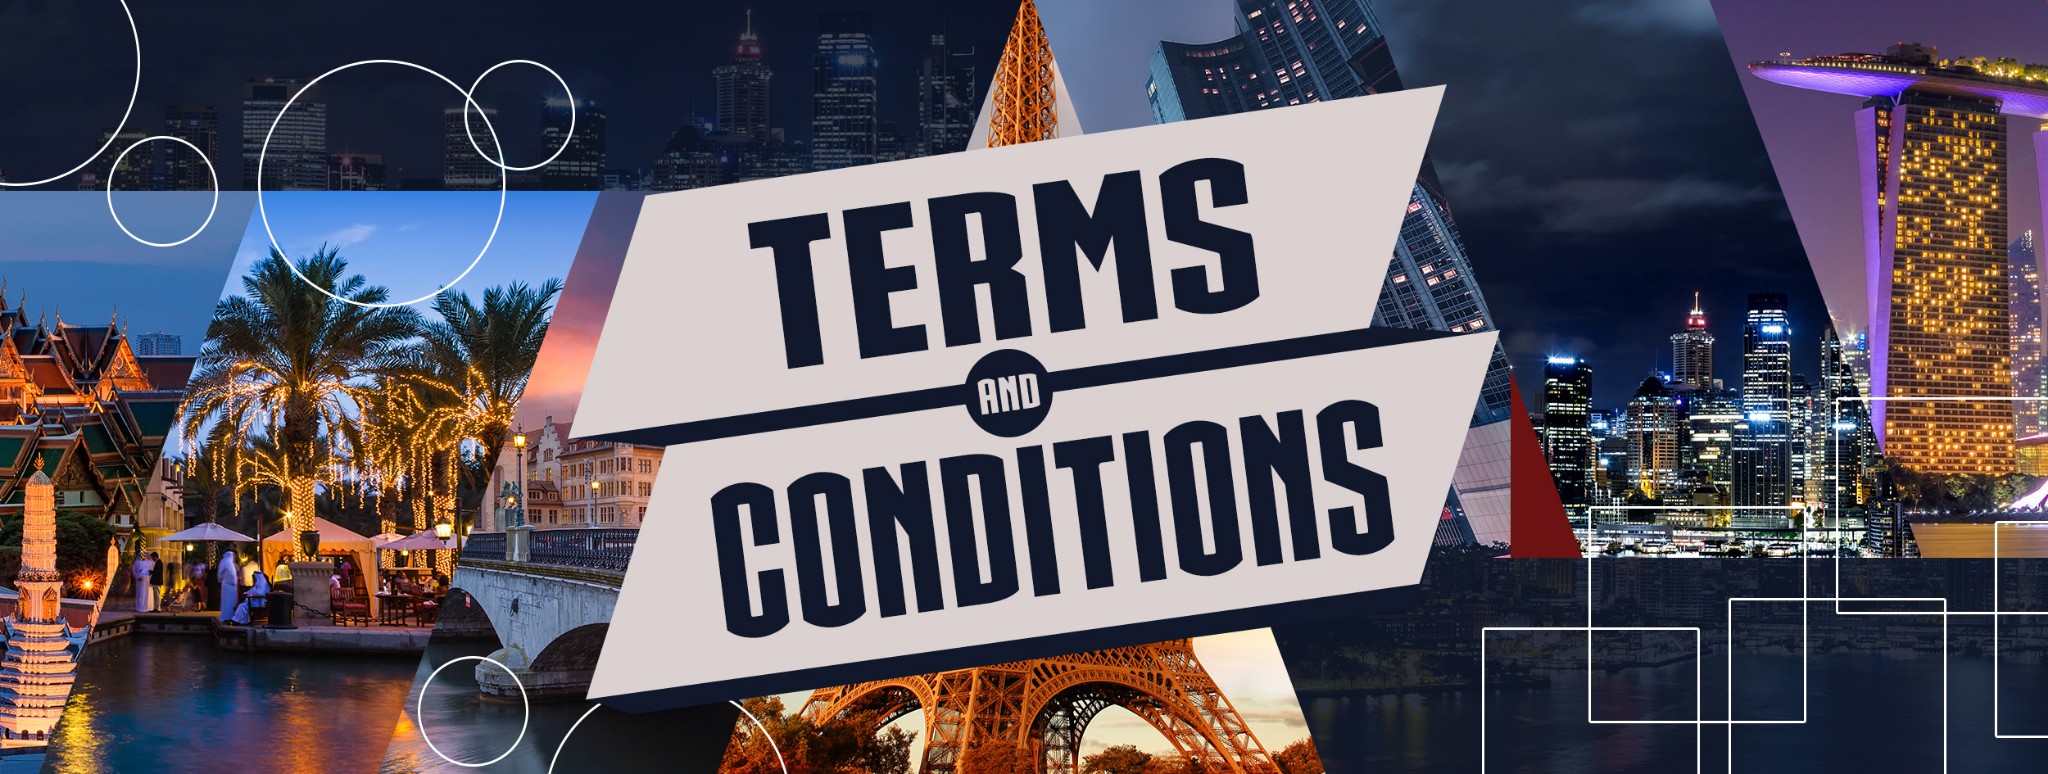 Terms and Conditions for the Agency